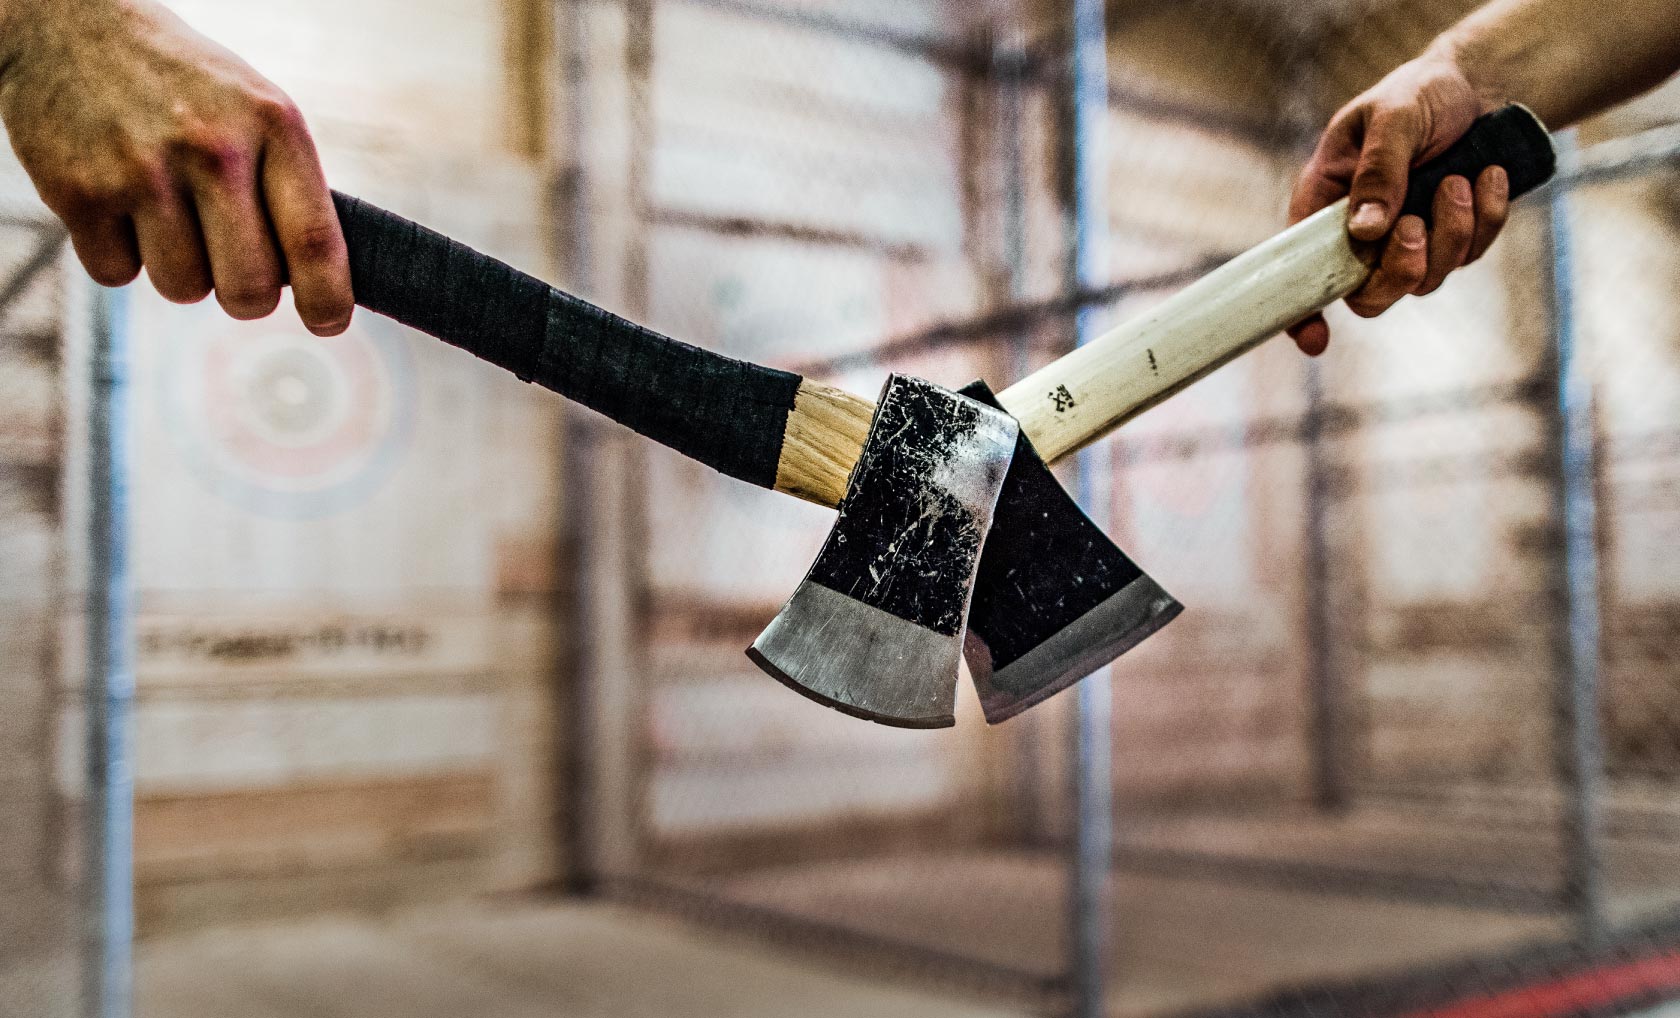 International Axe Throwing Federation (IATF) World Championship: A Look into the Largest Axe Throwing Tournament in the World